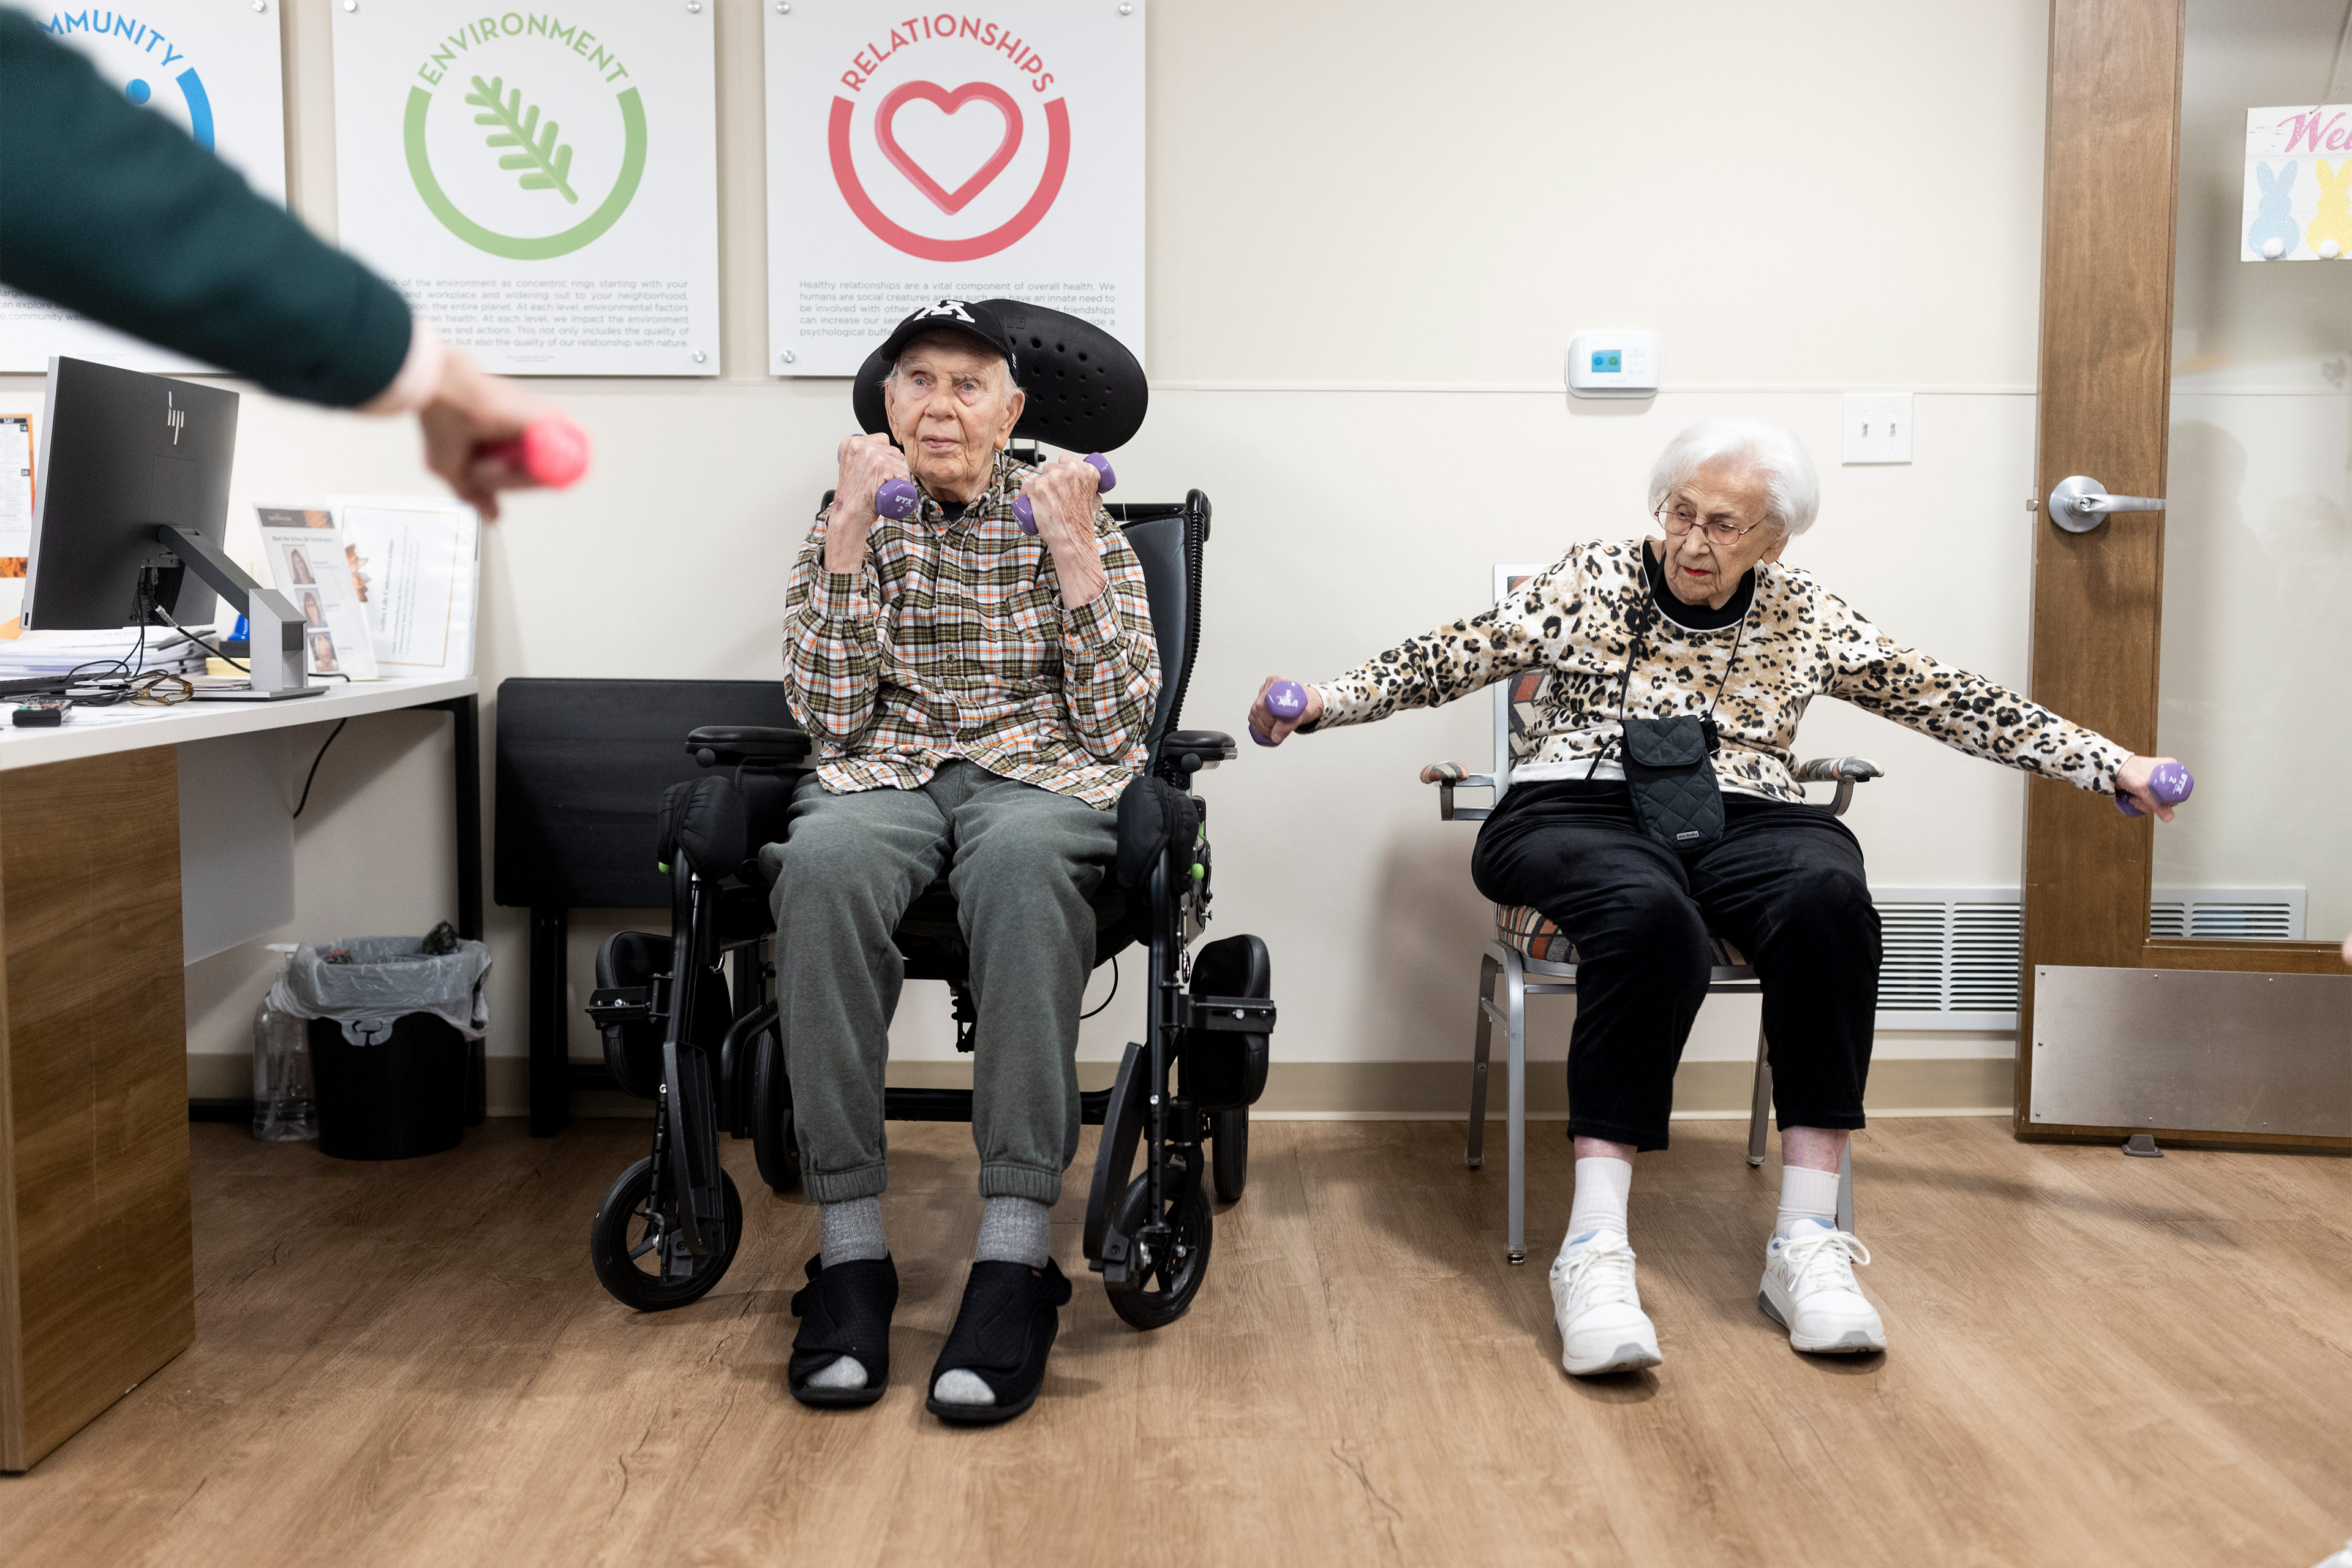 A photo of an elderly couple using small dumbbells to exercise while seated.